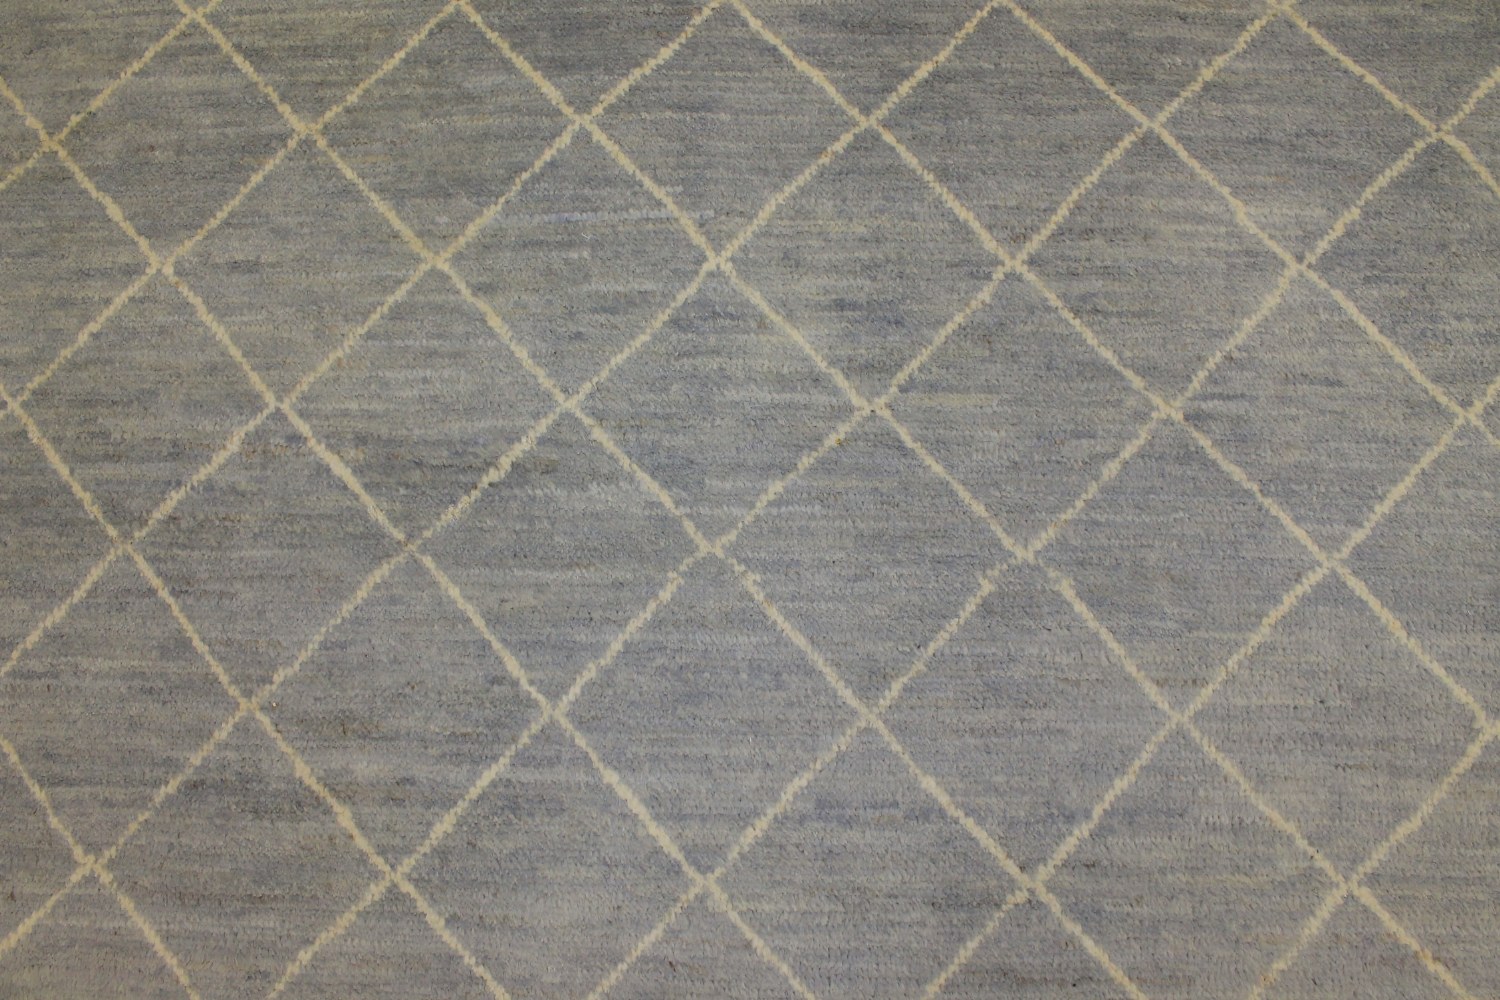 9x12 Contemporary Hand Knotted Wool Area Rug - MR021497